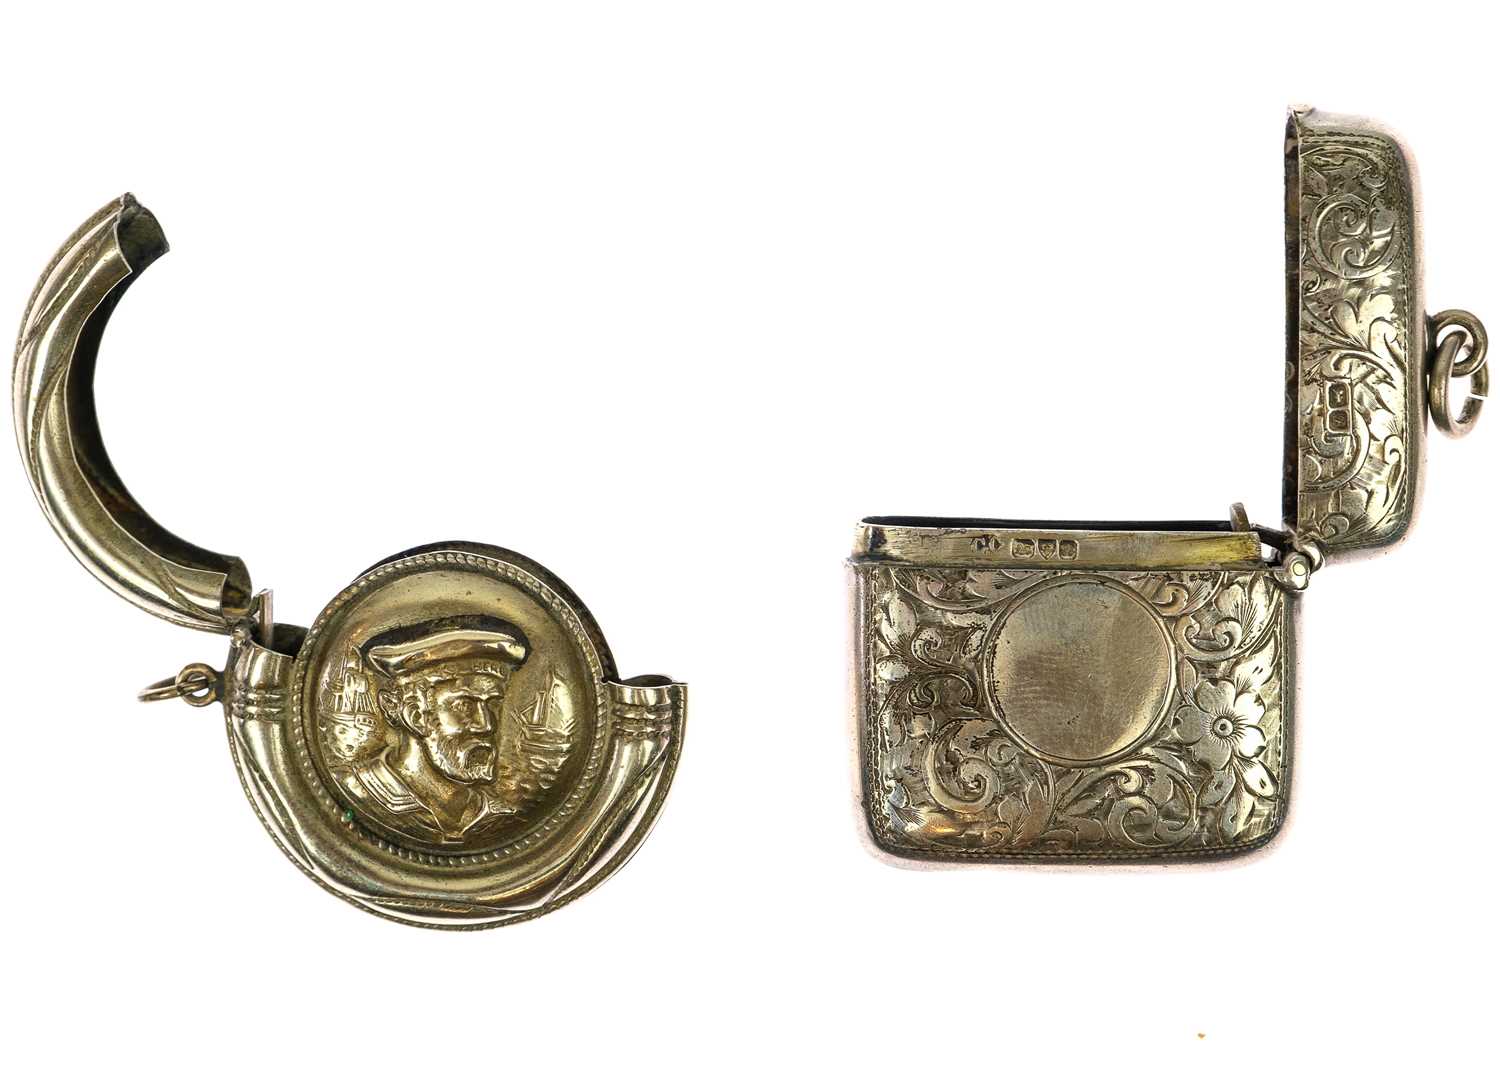 An Edwardian silver fob vesta case and a nickel Player's Navy Cut fob vesta case. - Image 5 of 5